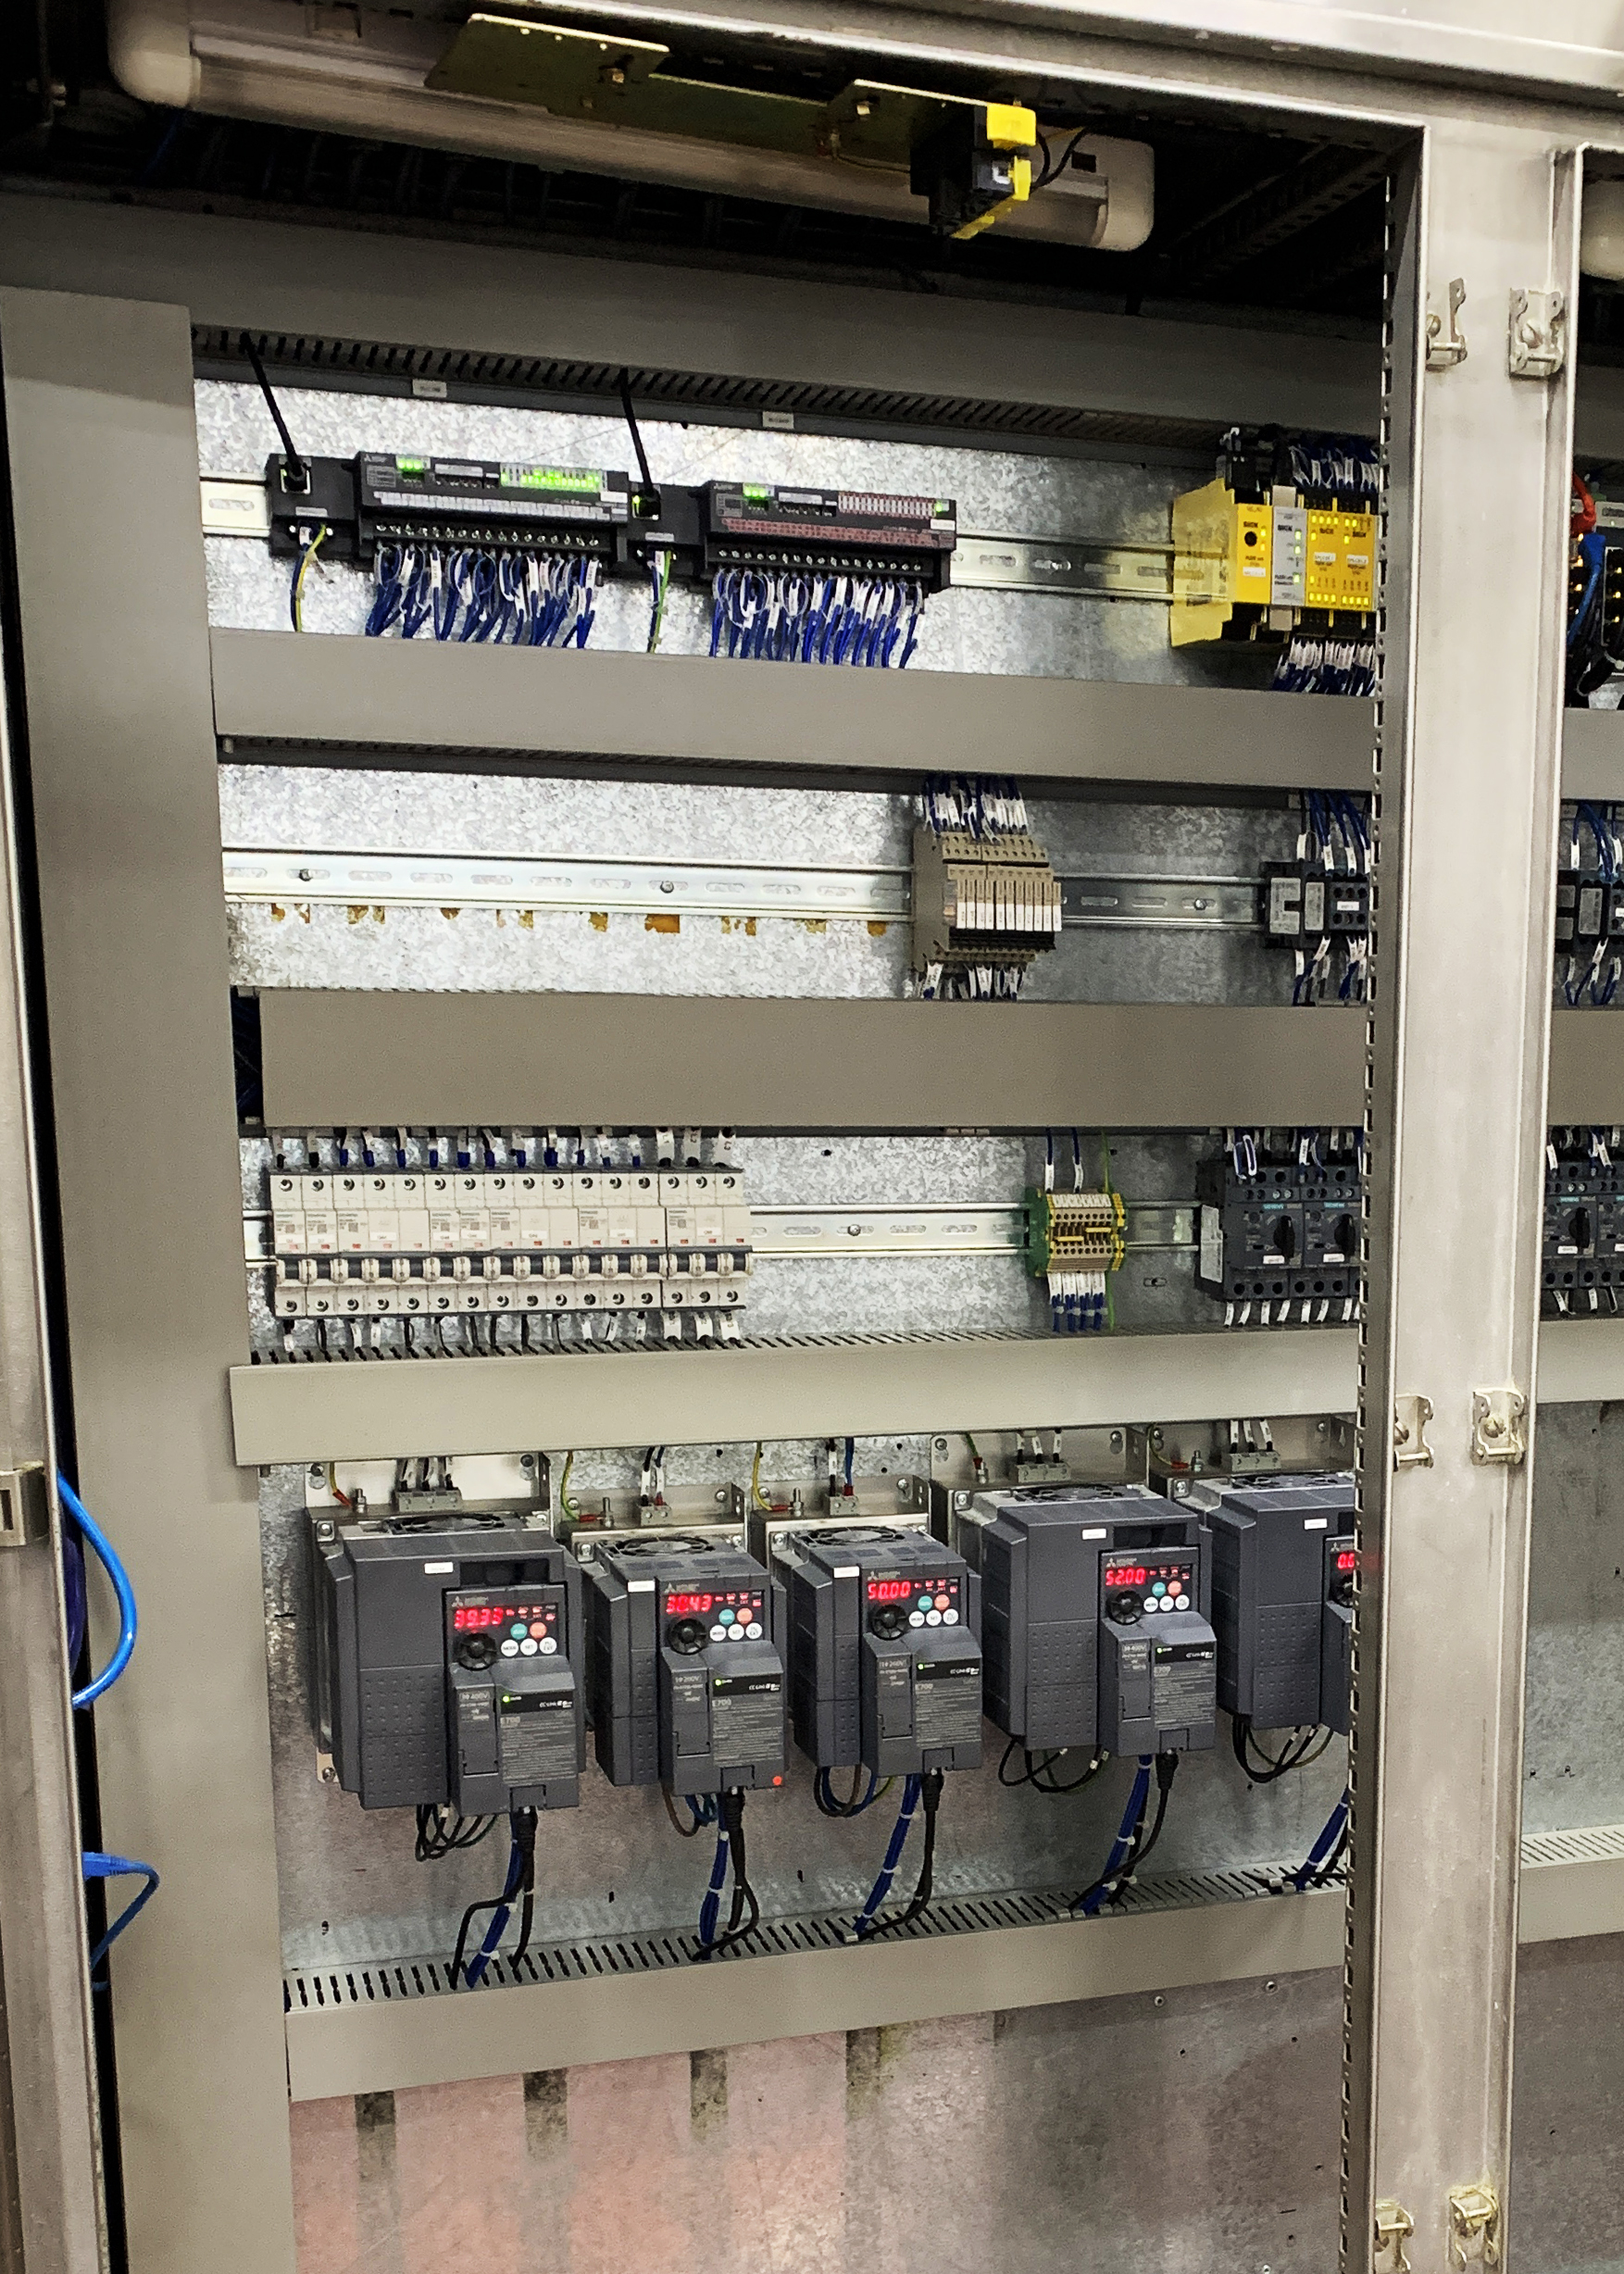 The new PLCs incorporate their own I/O modules, allowing Bakkavor Pizza to optimise their equipment footprint, saving panel space that could be used to host the new system’s inverters and servos. [Source: Control Freaks Ltd.]